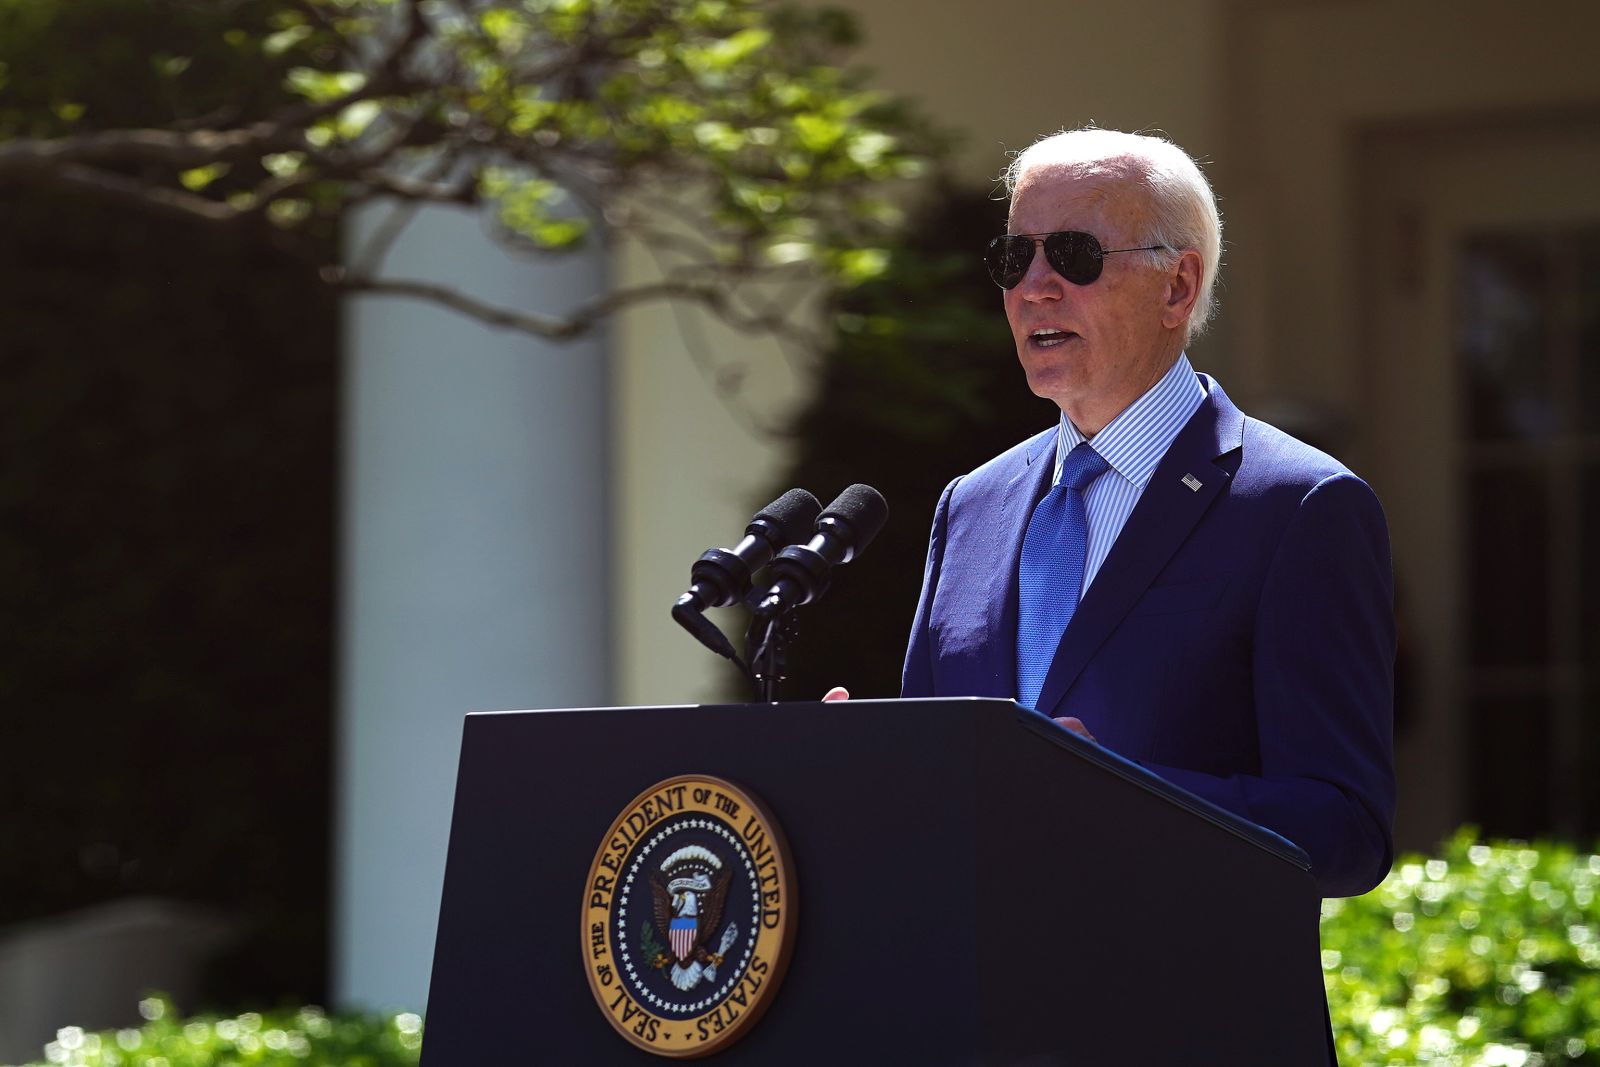 epa10584514 US President Joe Biden delivers remarks on environmental justice in the Rose Garden at the White House, Washington DC, USA, 21 April 2023. The President later signed an executive order creating a White House Office of Environmental Justice.  EPA/WILL OLIVER